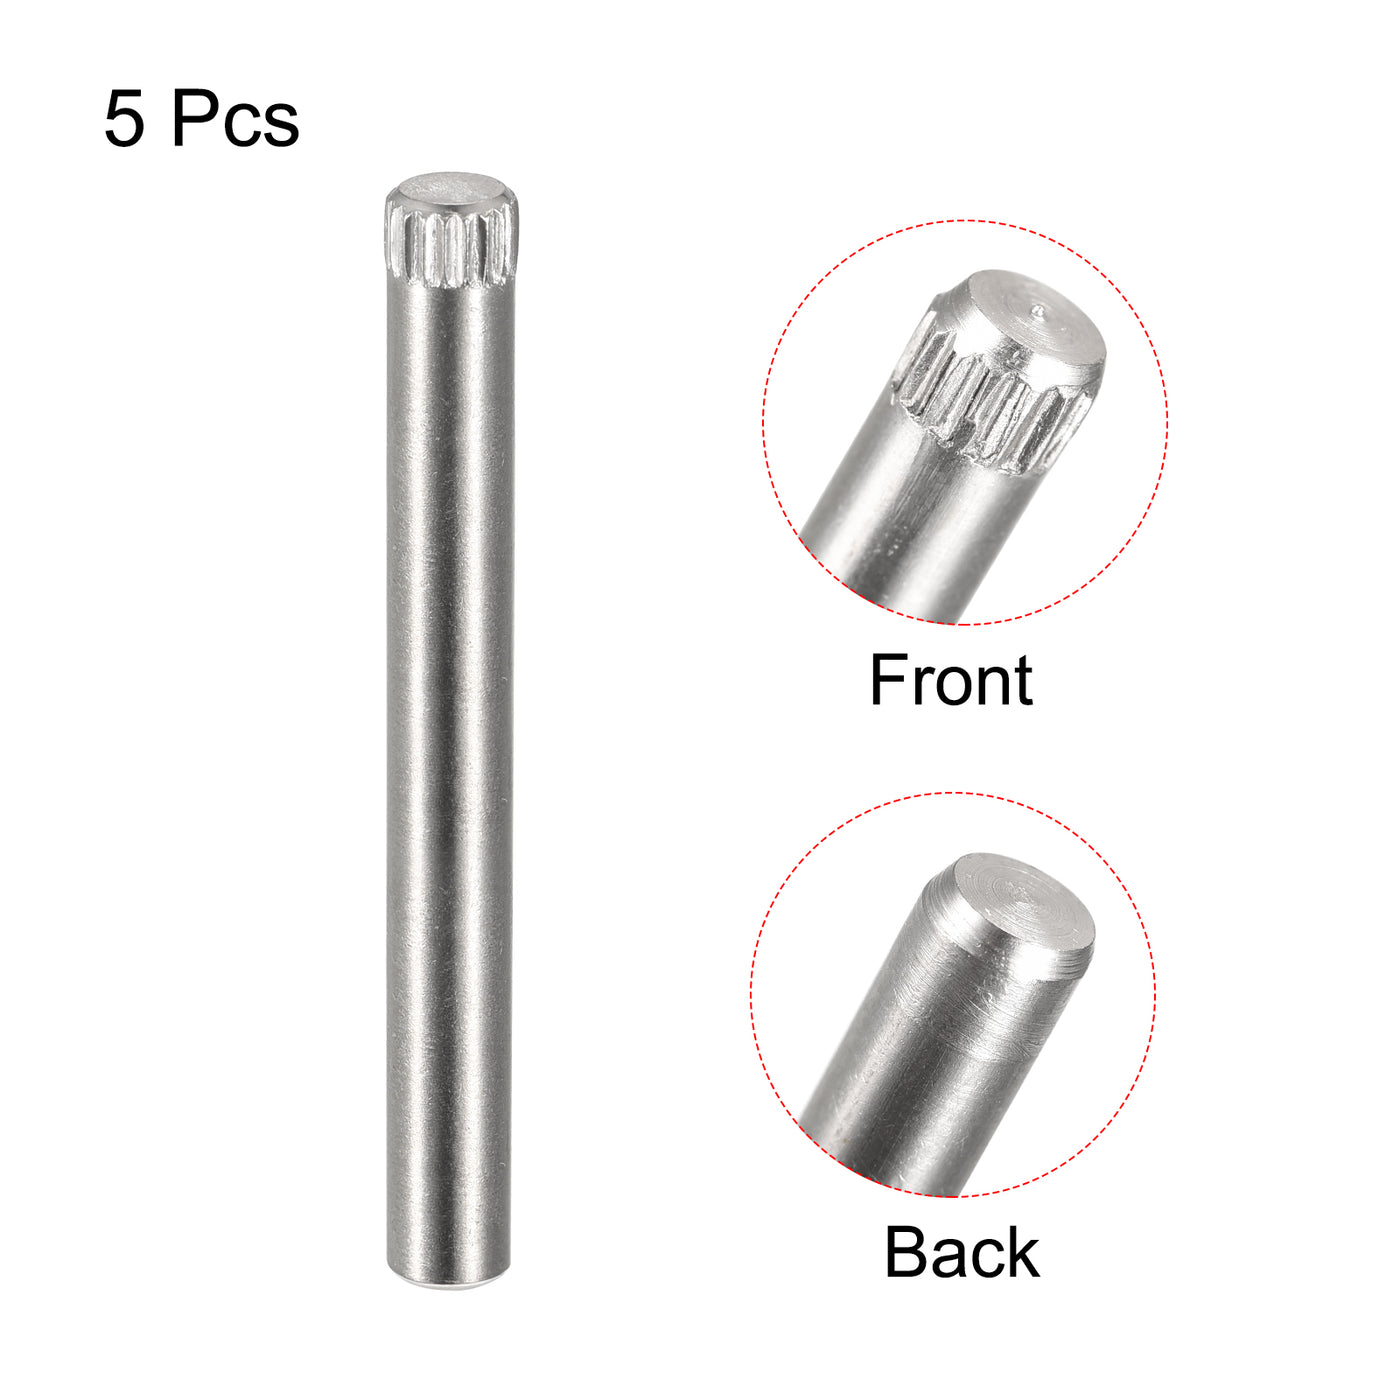 uxcell Uxcell 5x45mm 304 Stainless Steel Dowel Pins, 5Pcs Knurled Head Flat End Dowel Pin